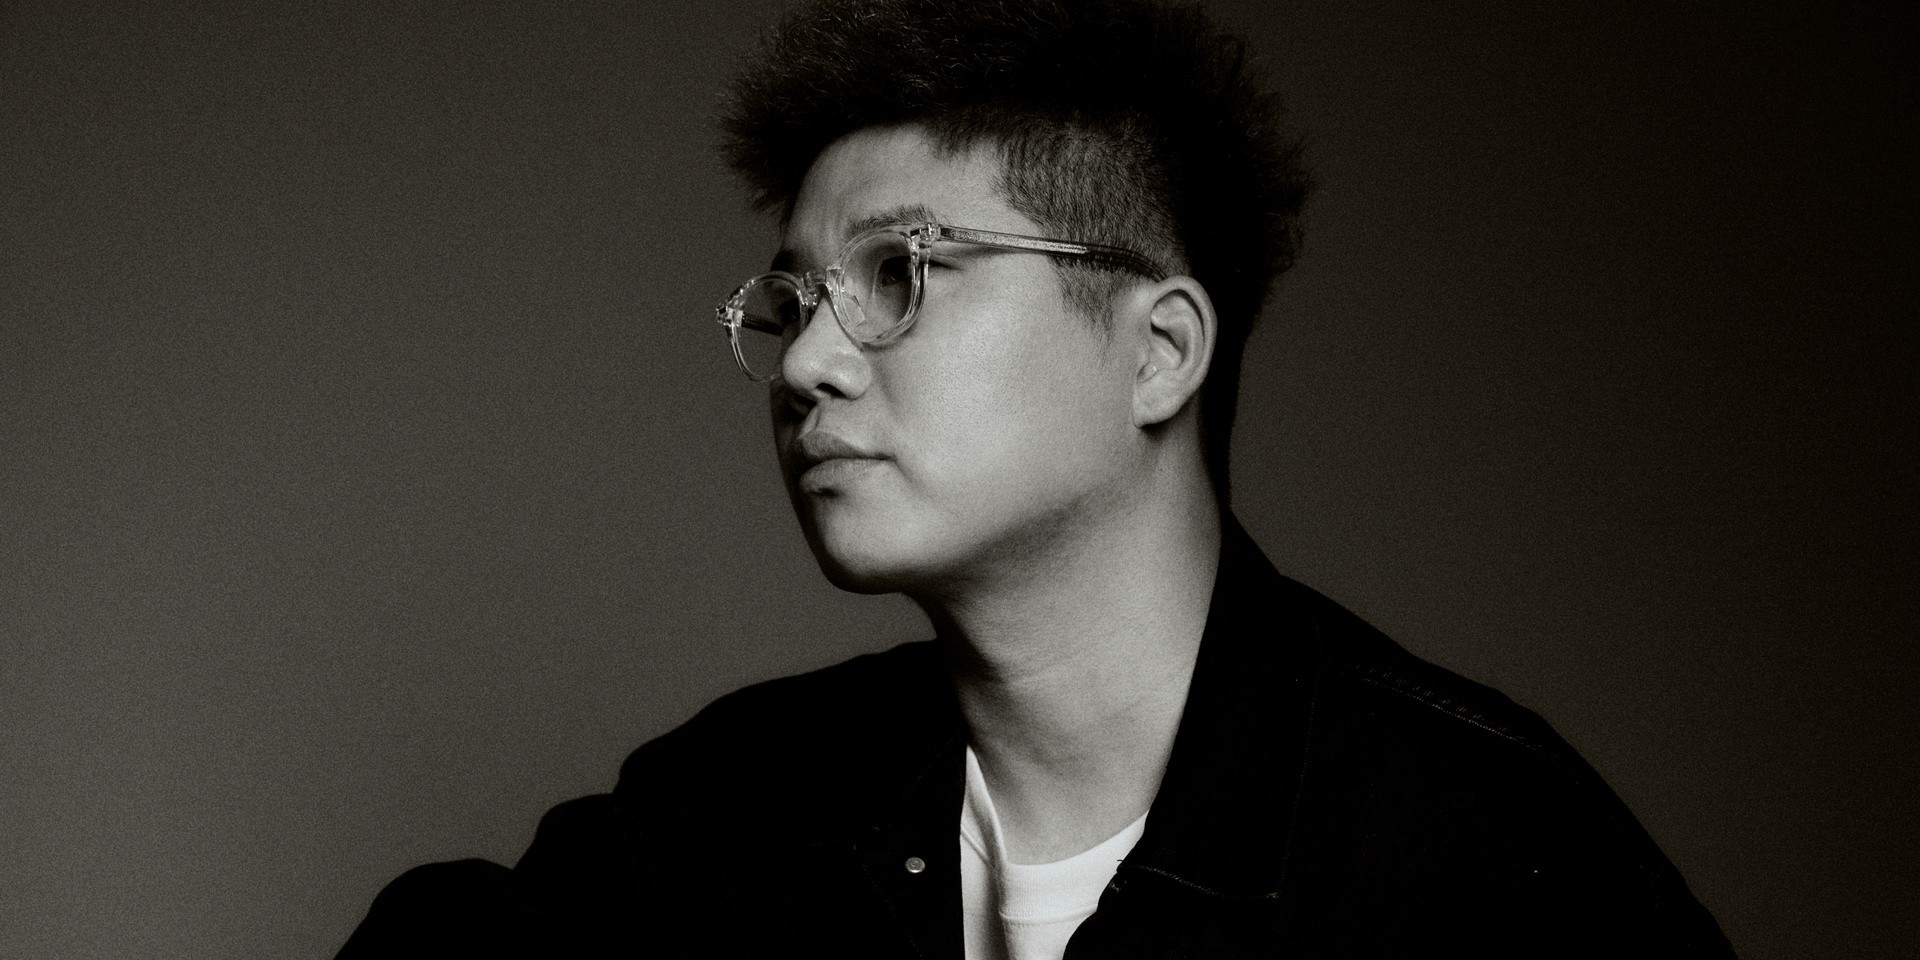 Guitarist and producer Soowan Chung on touring with BTS, working on K-pop tunes and K-drama OSTs, and recording over 6,000 songs